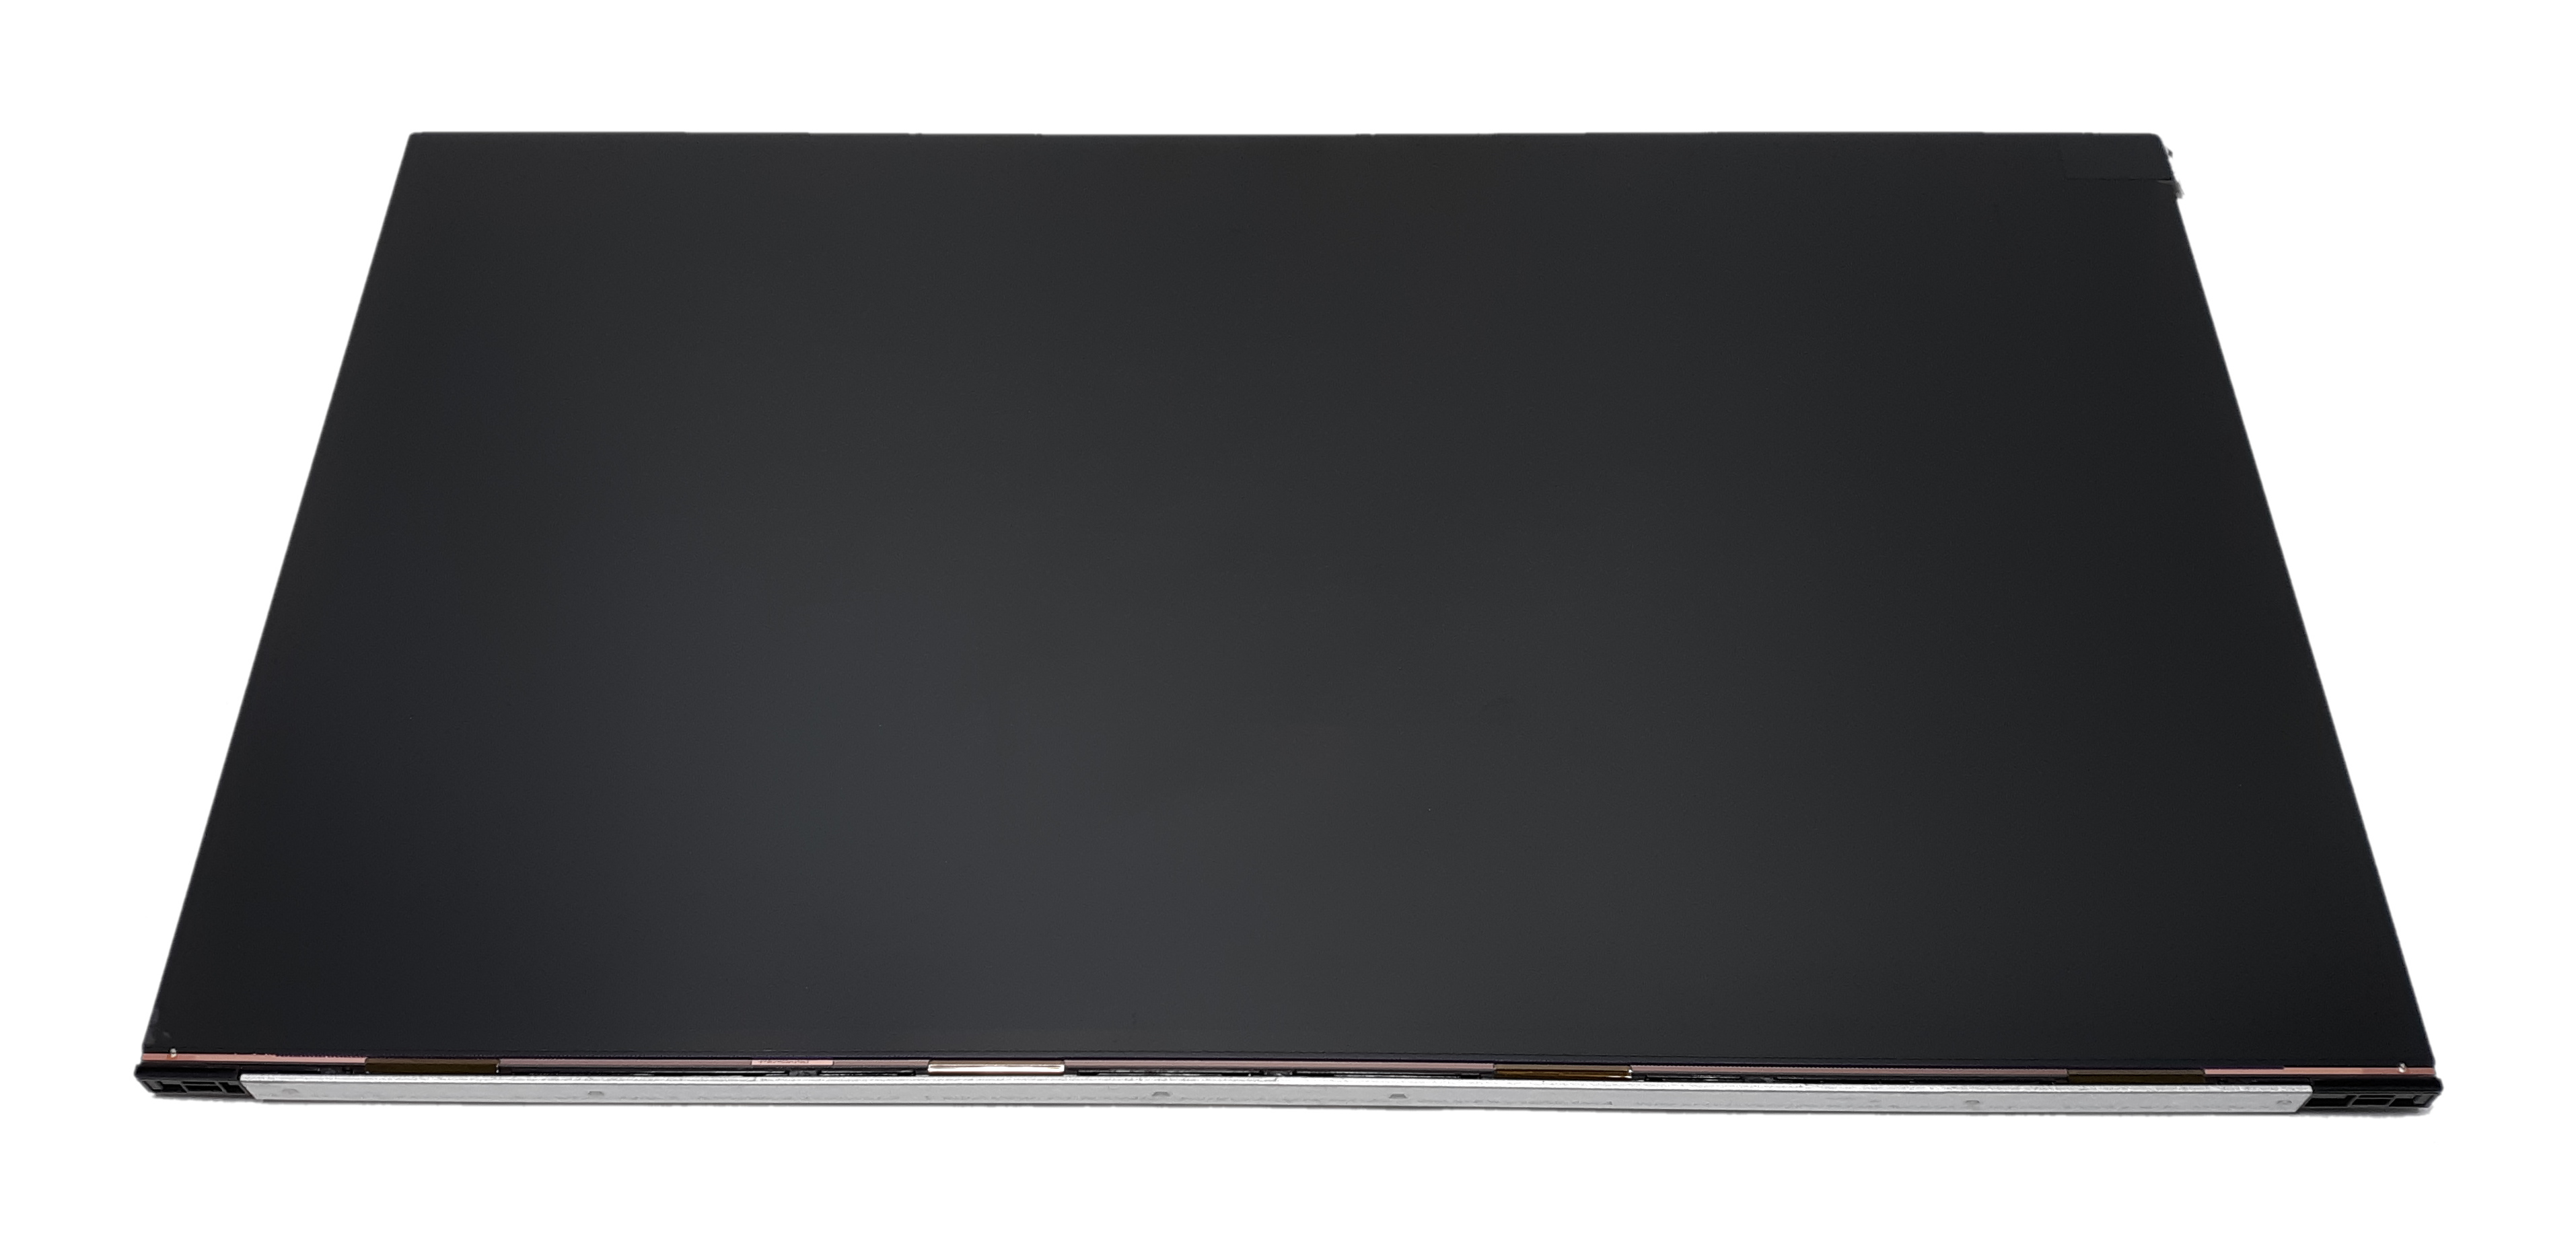 LG LCD Screen 21.5" Non-Touch LM215WF9 (SS) (A2) HP ProOne 600 G4 ThinkCentre M820z